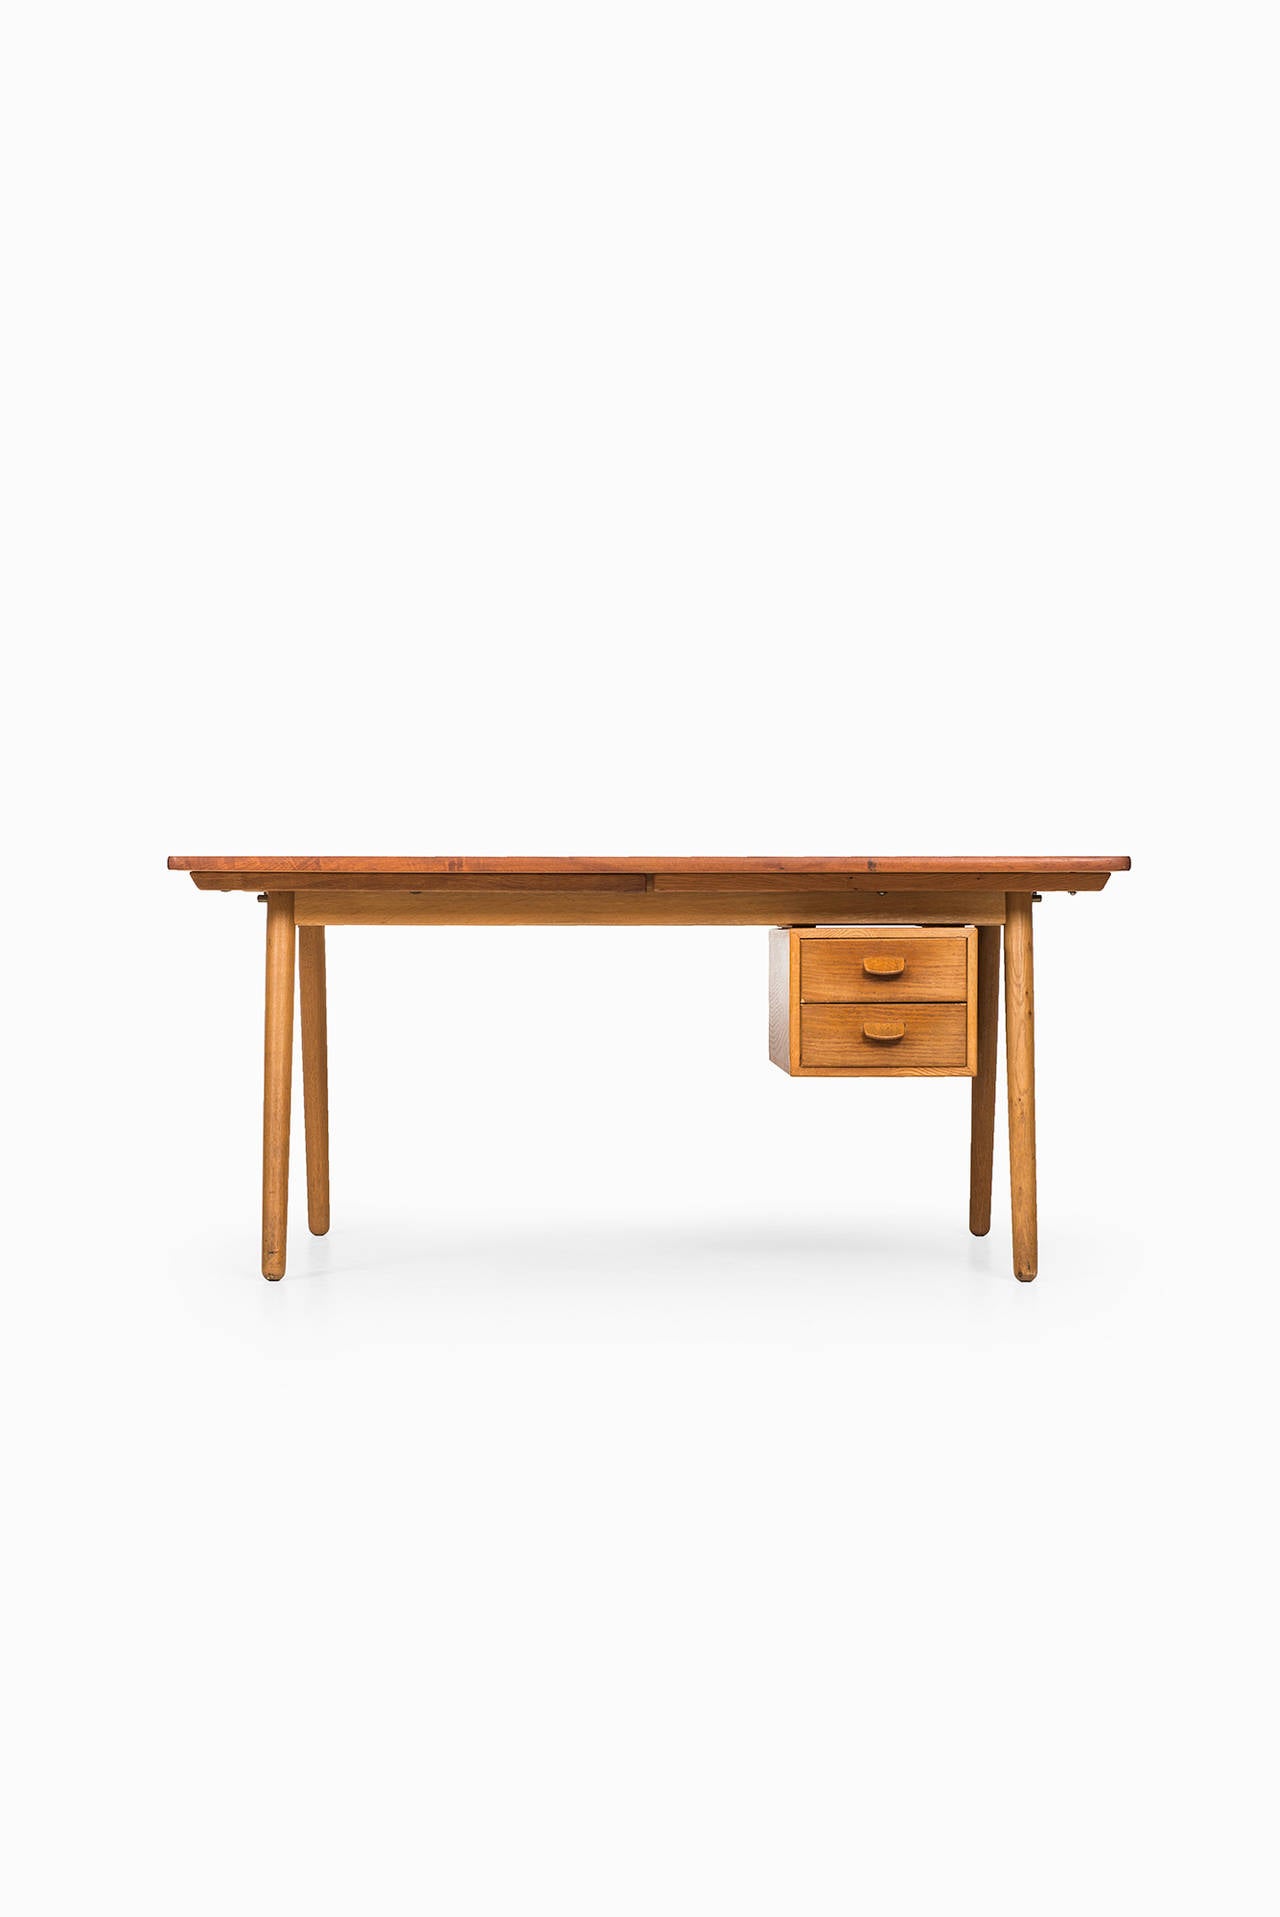 Very rare desk and dining table model C35/J62 designed by Poul Volther. Produced by FDB Møbler in Denmark. Possible to move the drawer to left/right side and away.